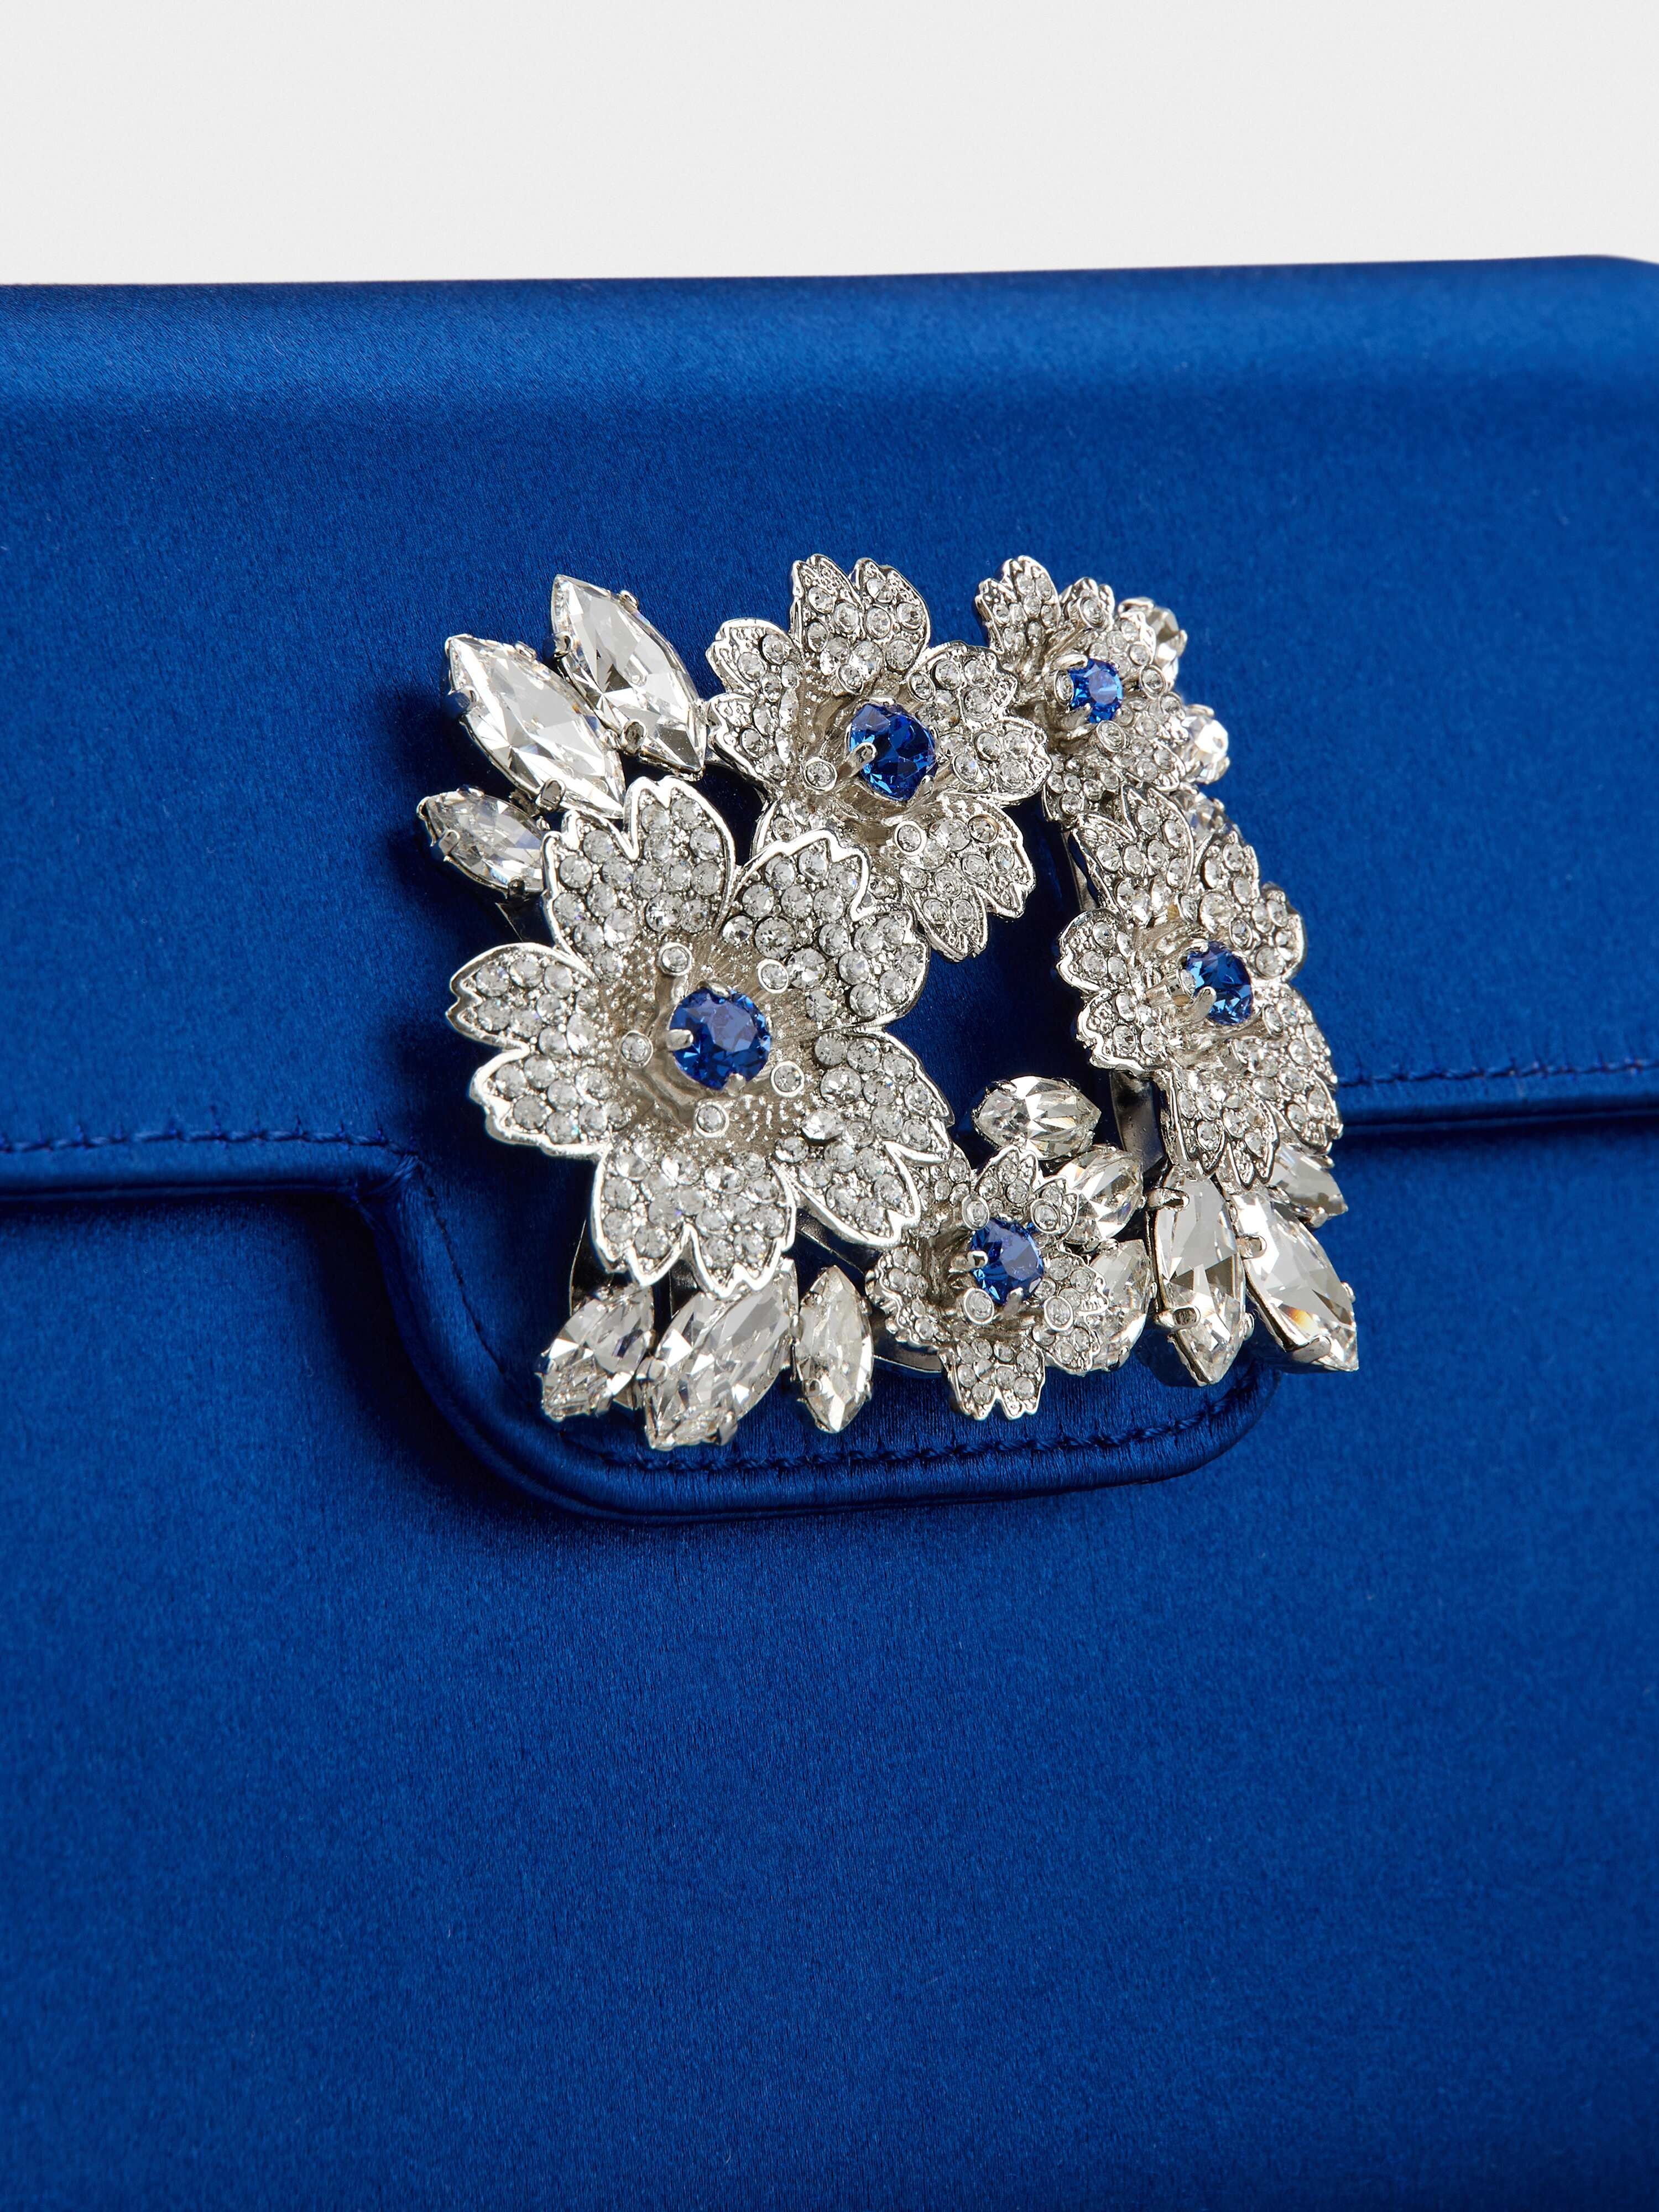 RV Bouquet Strass Colored Buckle Clutch in Satin - 7